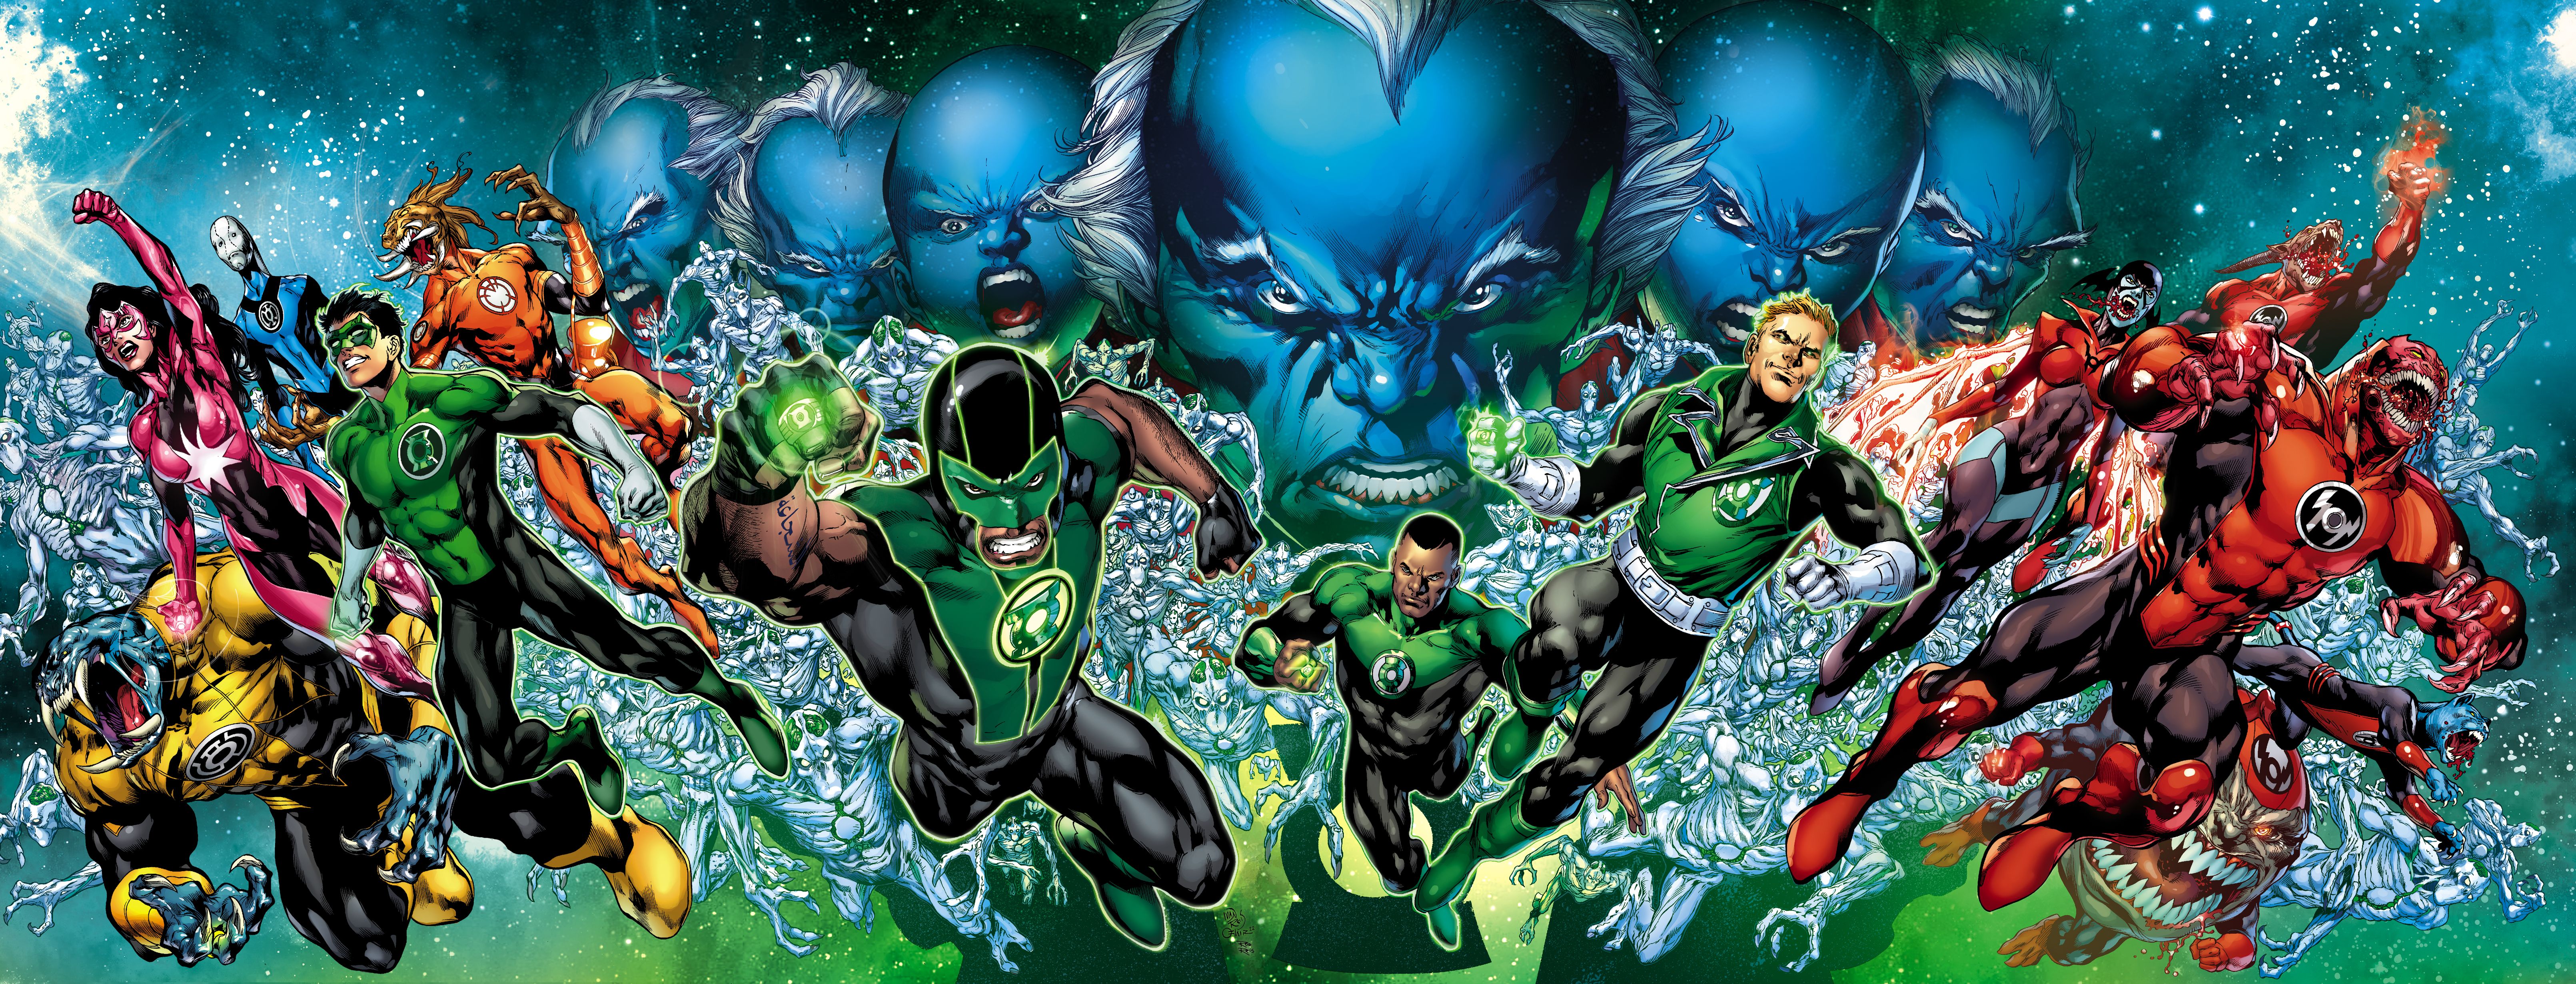 Green Lantern Corps Leads Revealed? It's the Best of Both Worlds ...